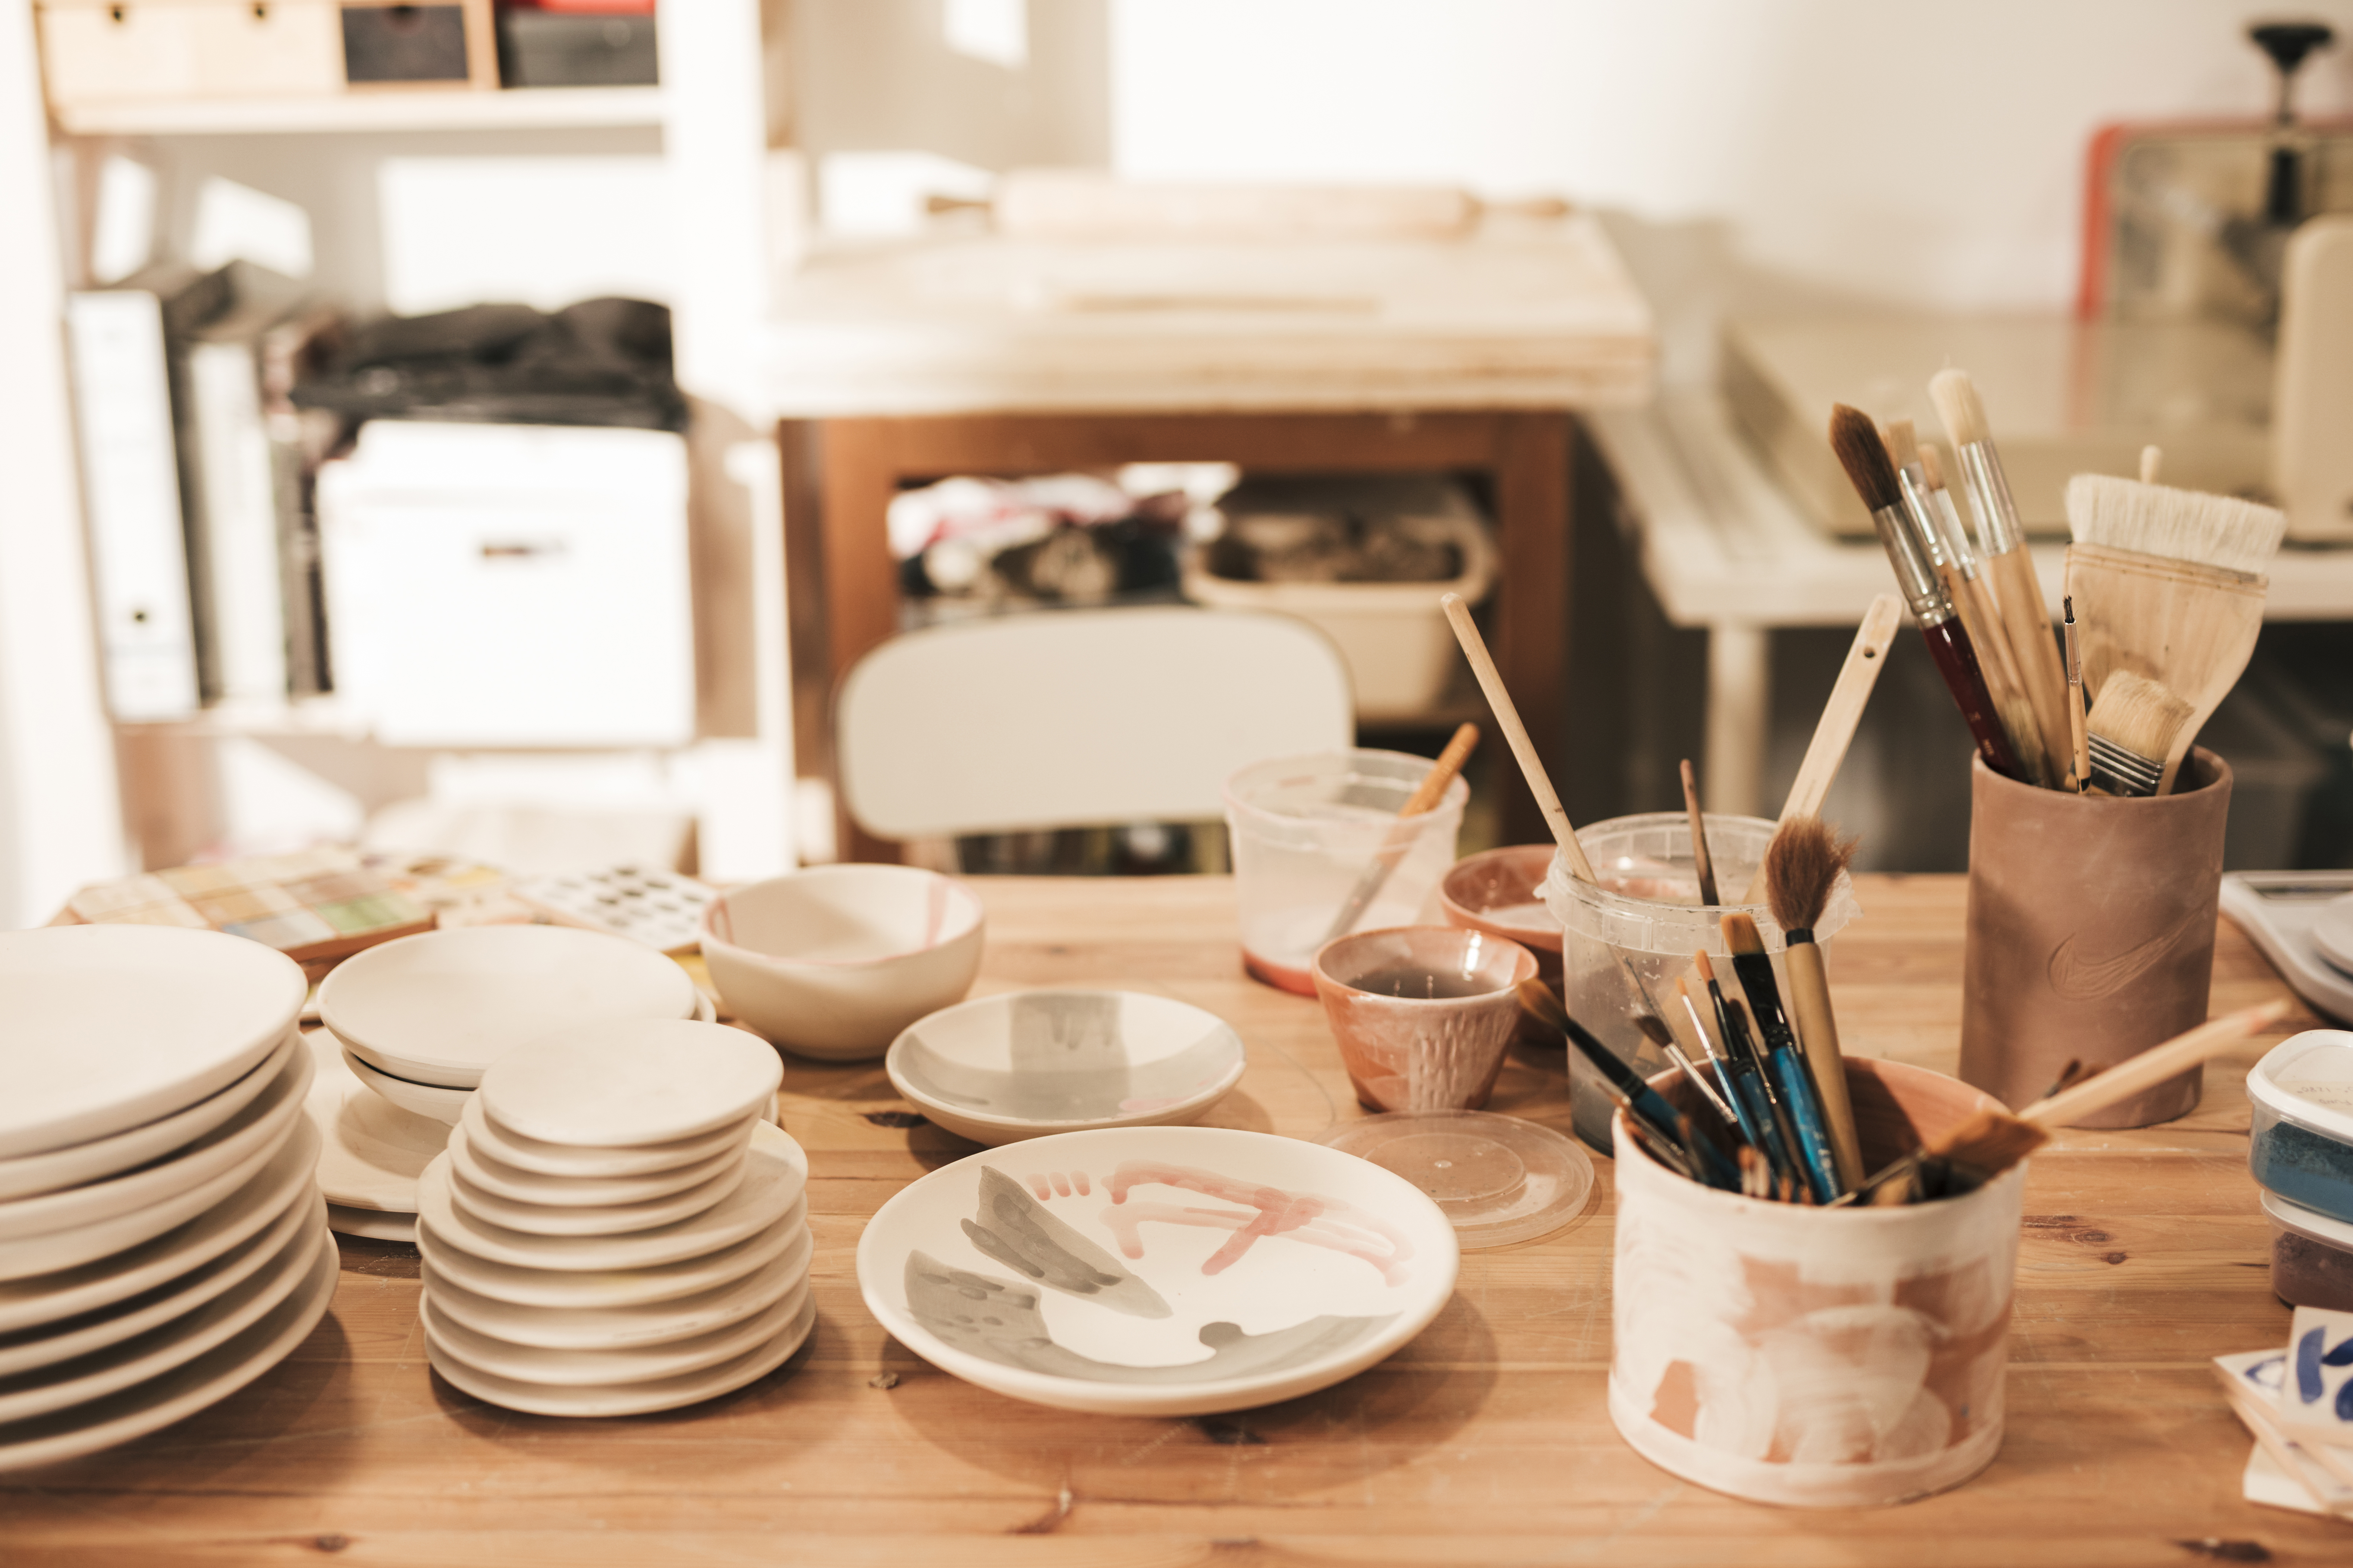 ceramic-plate-and-bowl-with-paint-brushes-and-tools-on-wooden-table-in-workshop